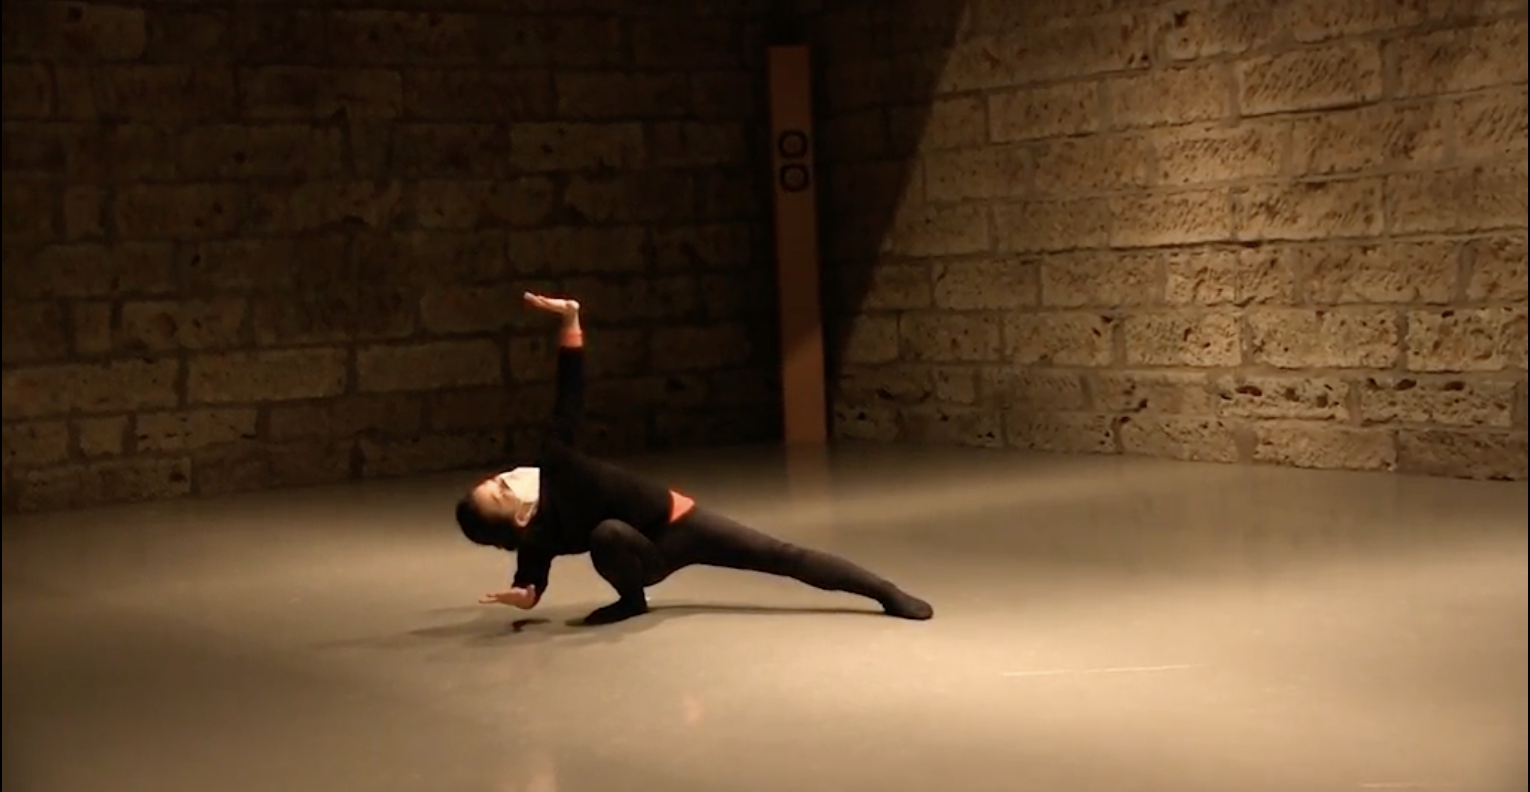 A woman dances in an otherwise empty room with brick walls